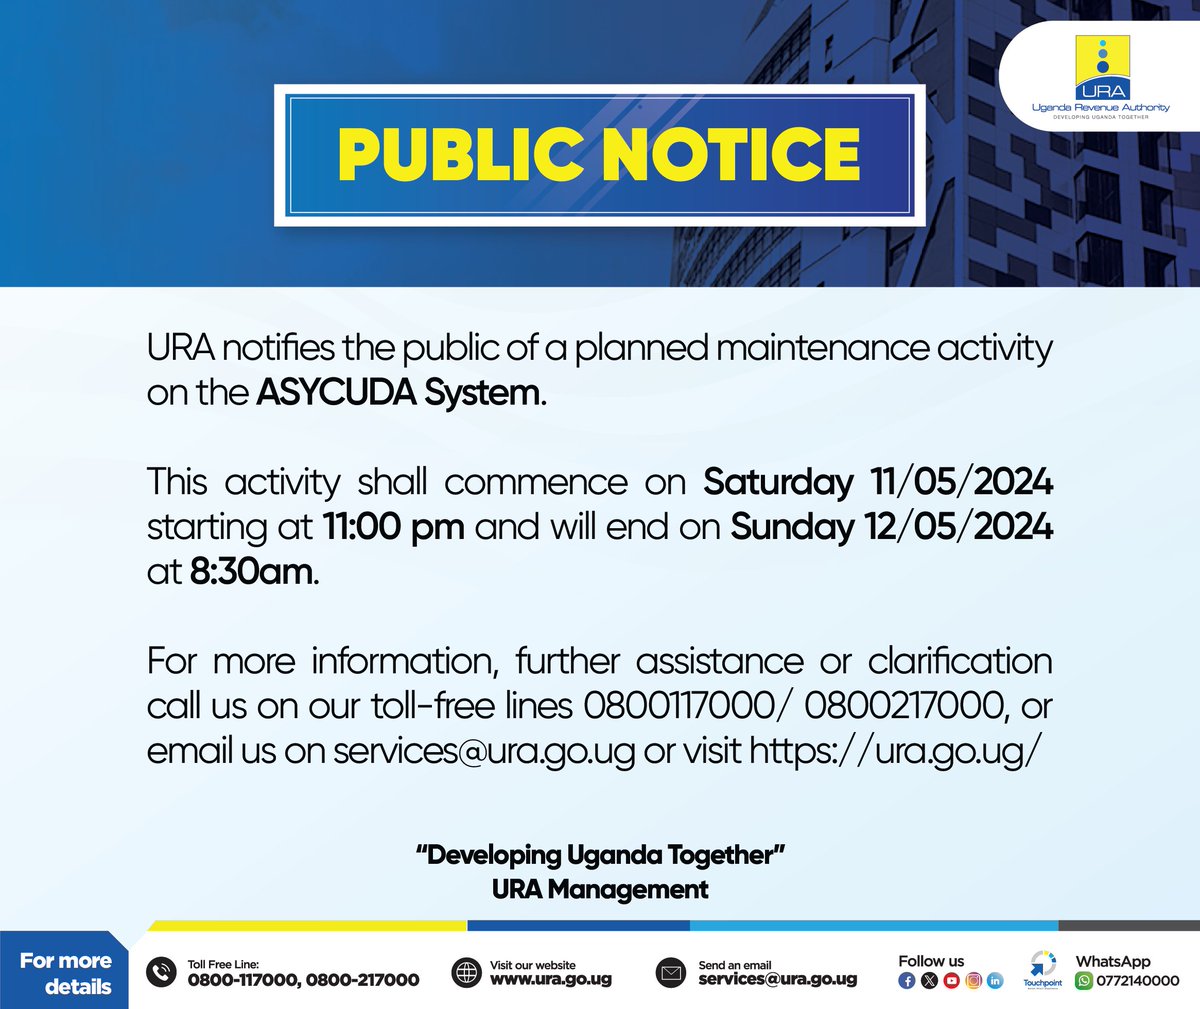 #URAPublicNotice Alert! This is to inform taxpayers that we shall be conducting a maintenance activity on the ASYCUDA system tomorrow from 11:00pm to Sunday 12 May, 2024 at 8:30am. #Customs101 #FfeBanno